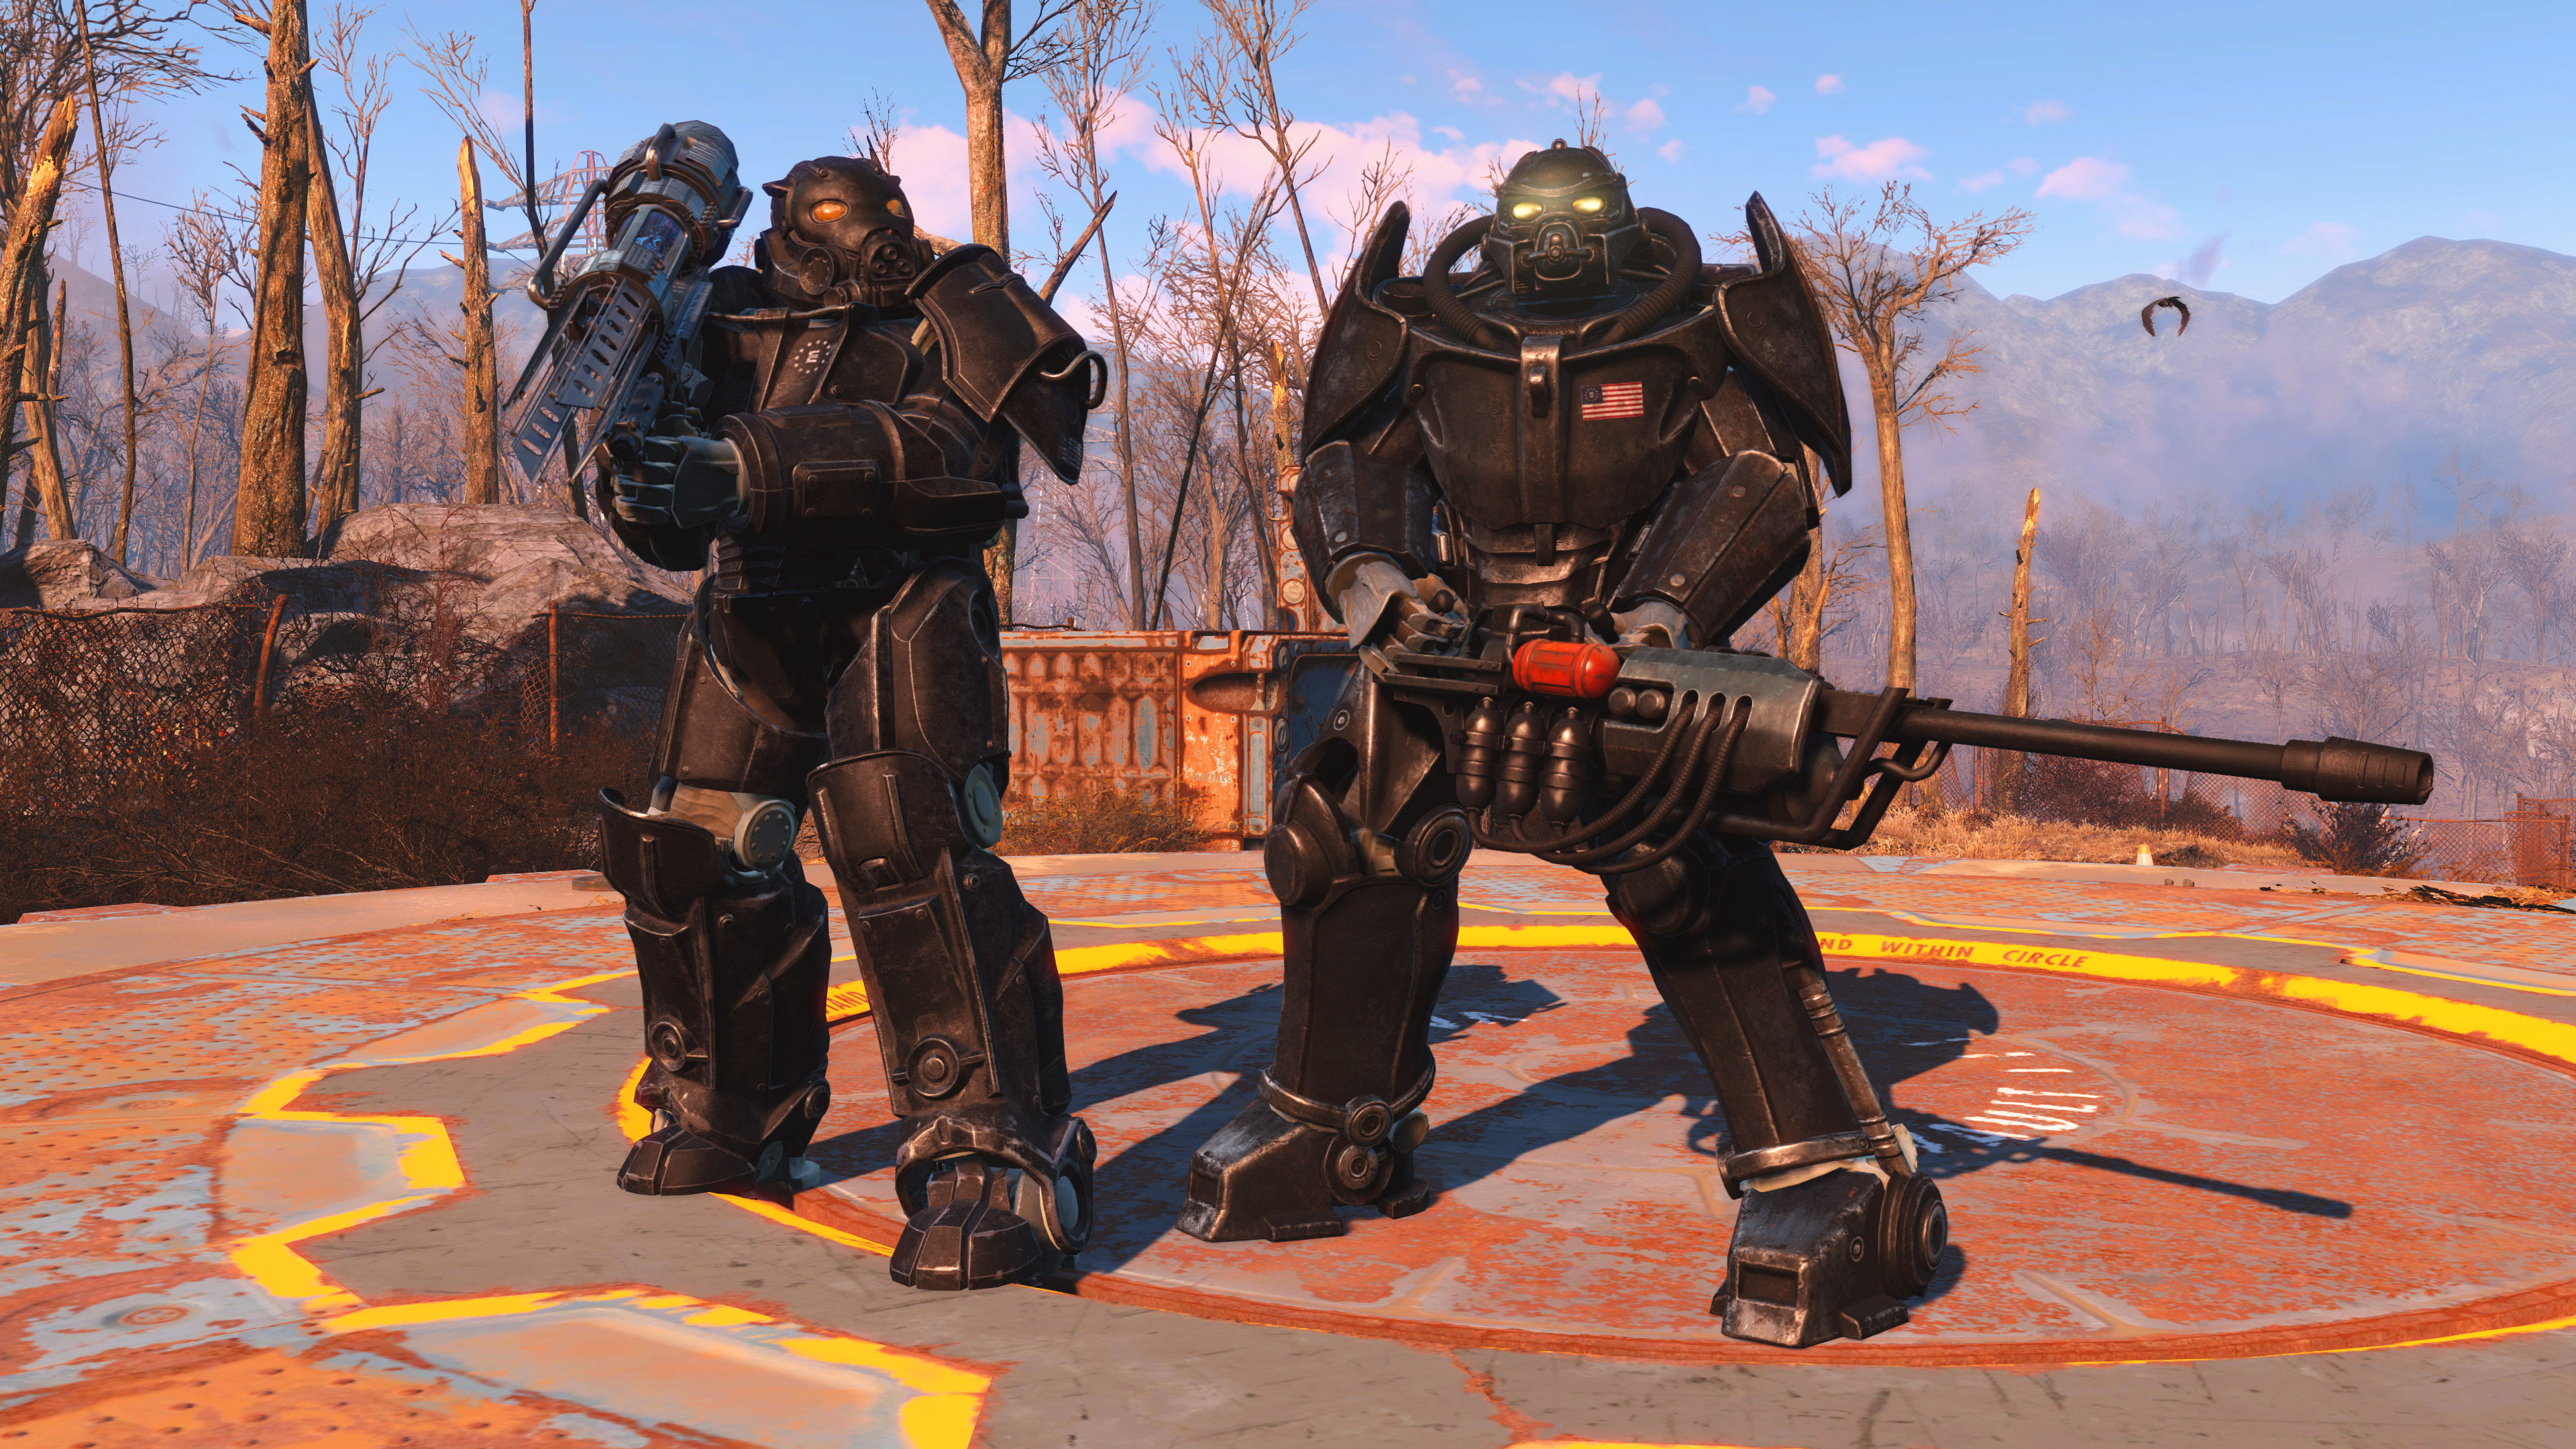 Fallout 4 is finally getting a next-gen update, just in time for the TV series